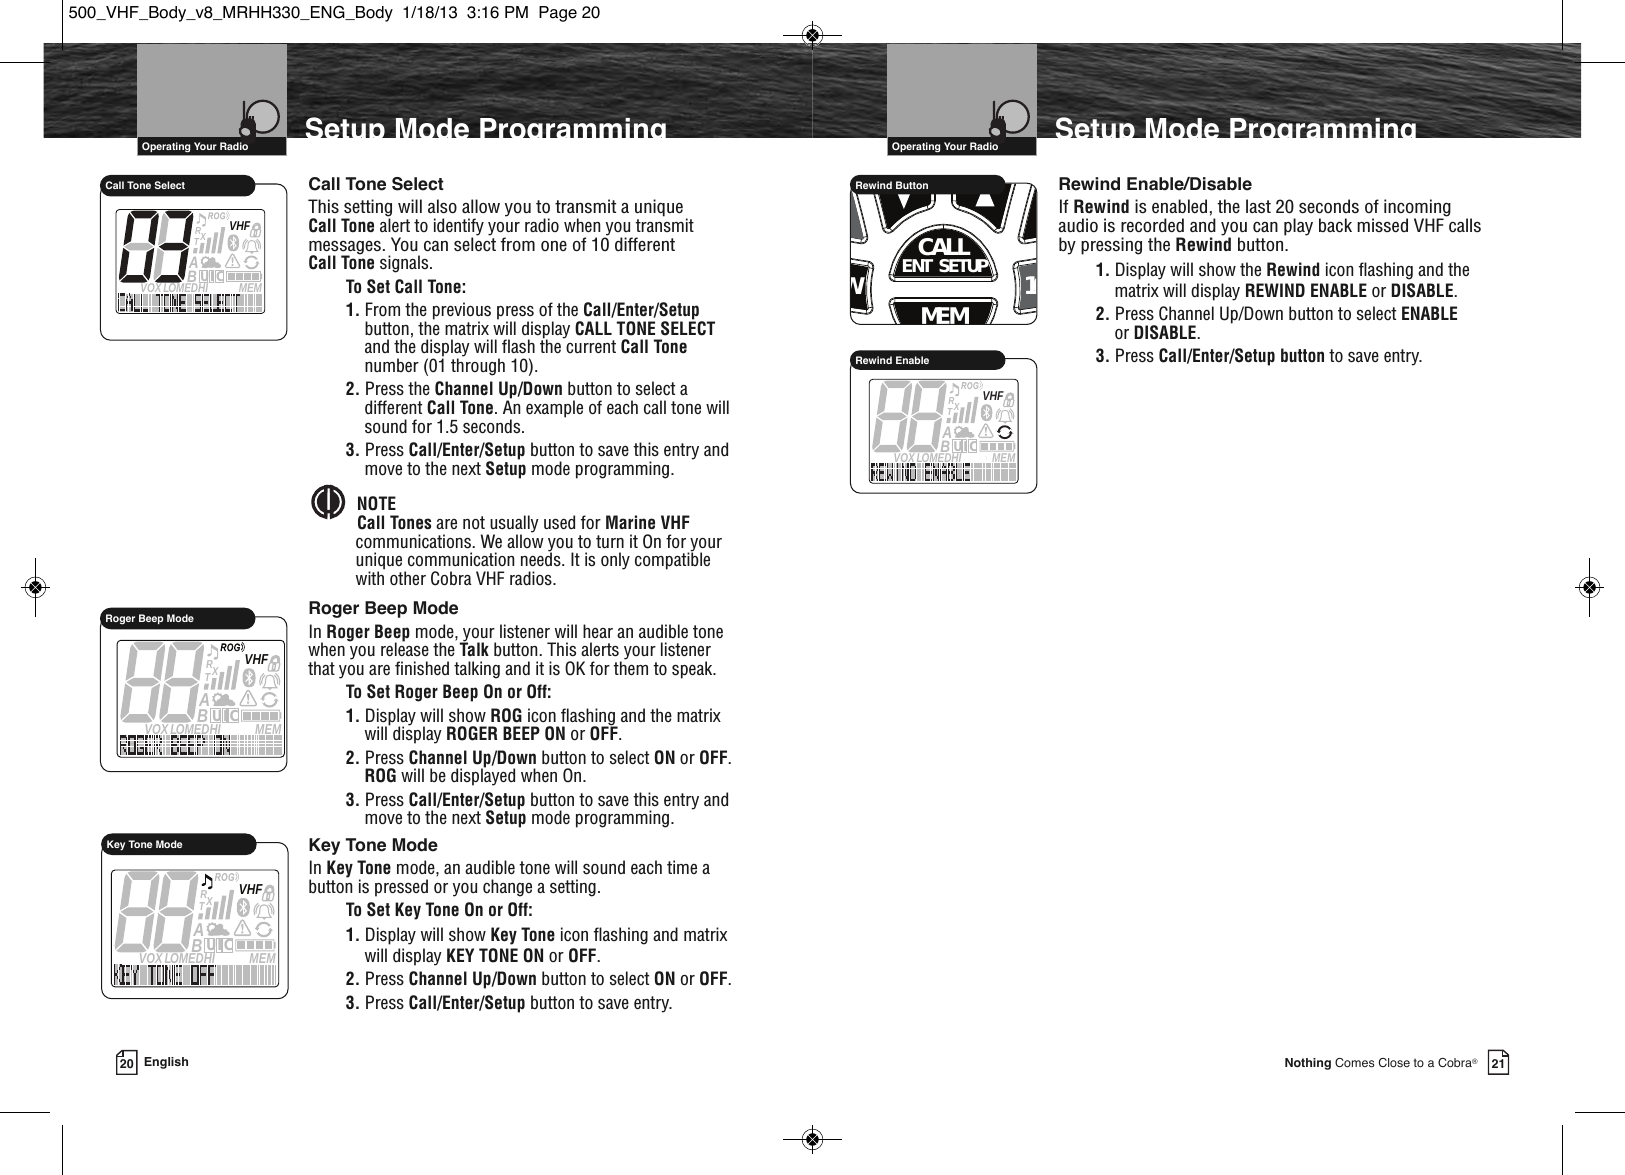 Page 13 of Cobra Electronics MRHH500 BT ACCESSORY IN MARINE RADIO User Manual MRHH330 ENG Body